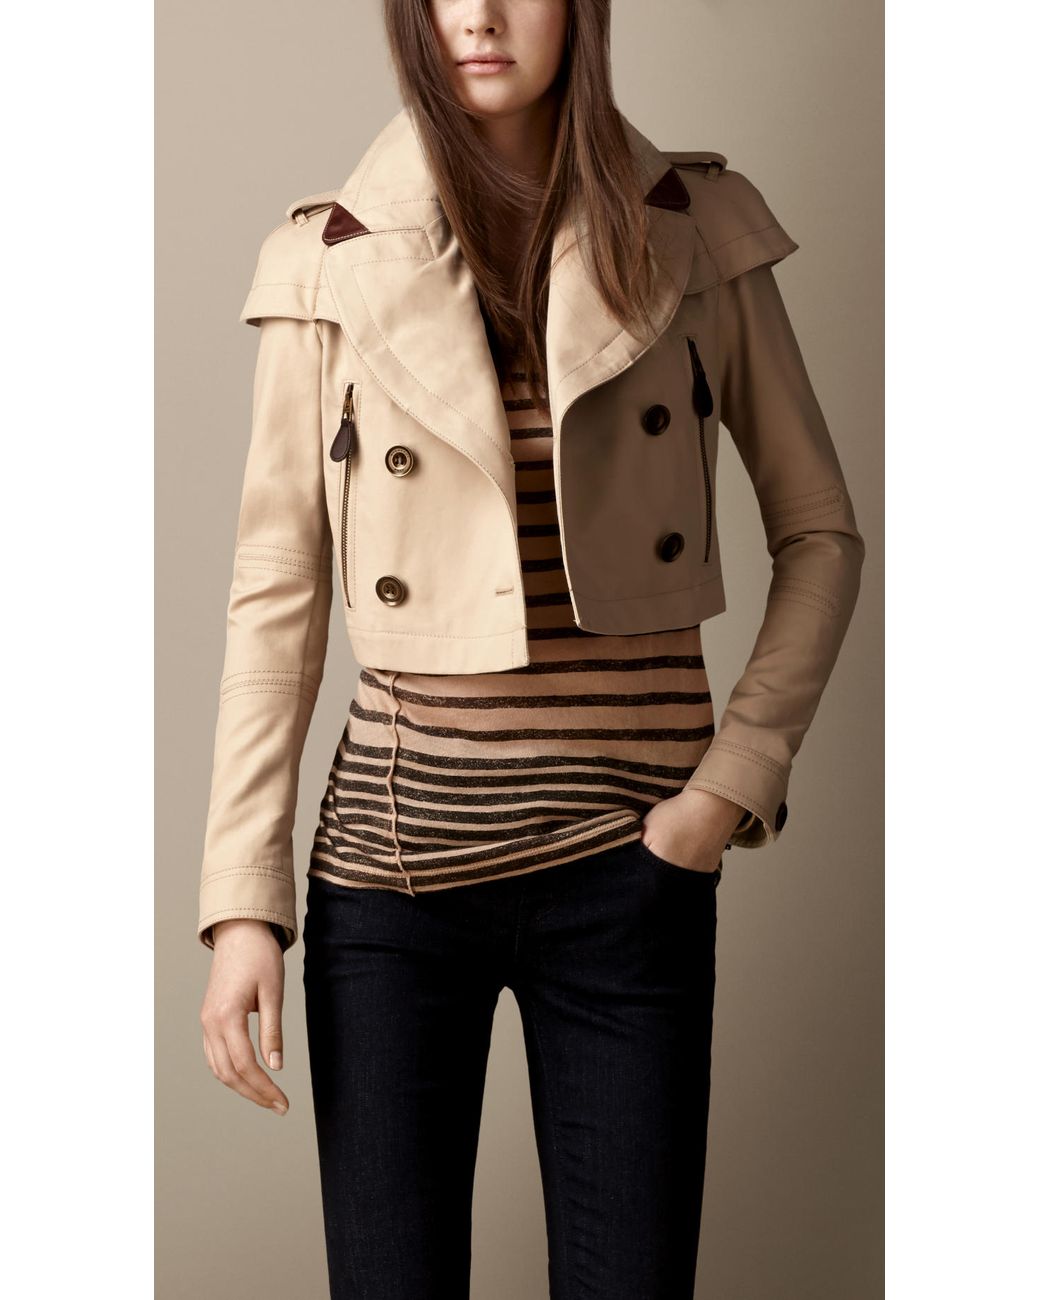 Arriba 61+ imagen burberry cropped trench jacket